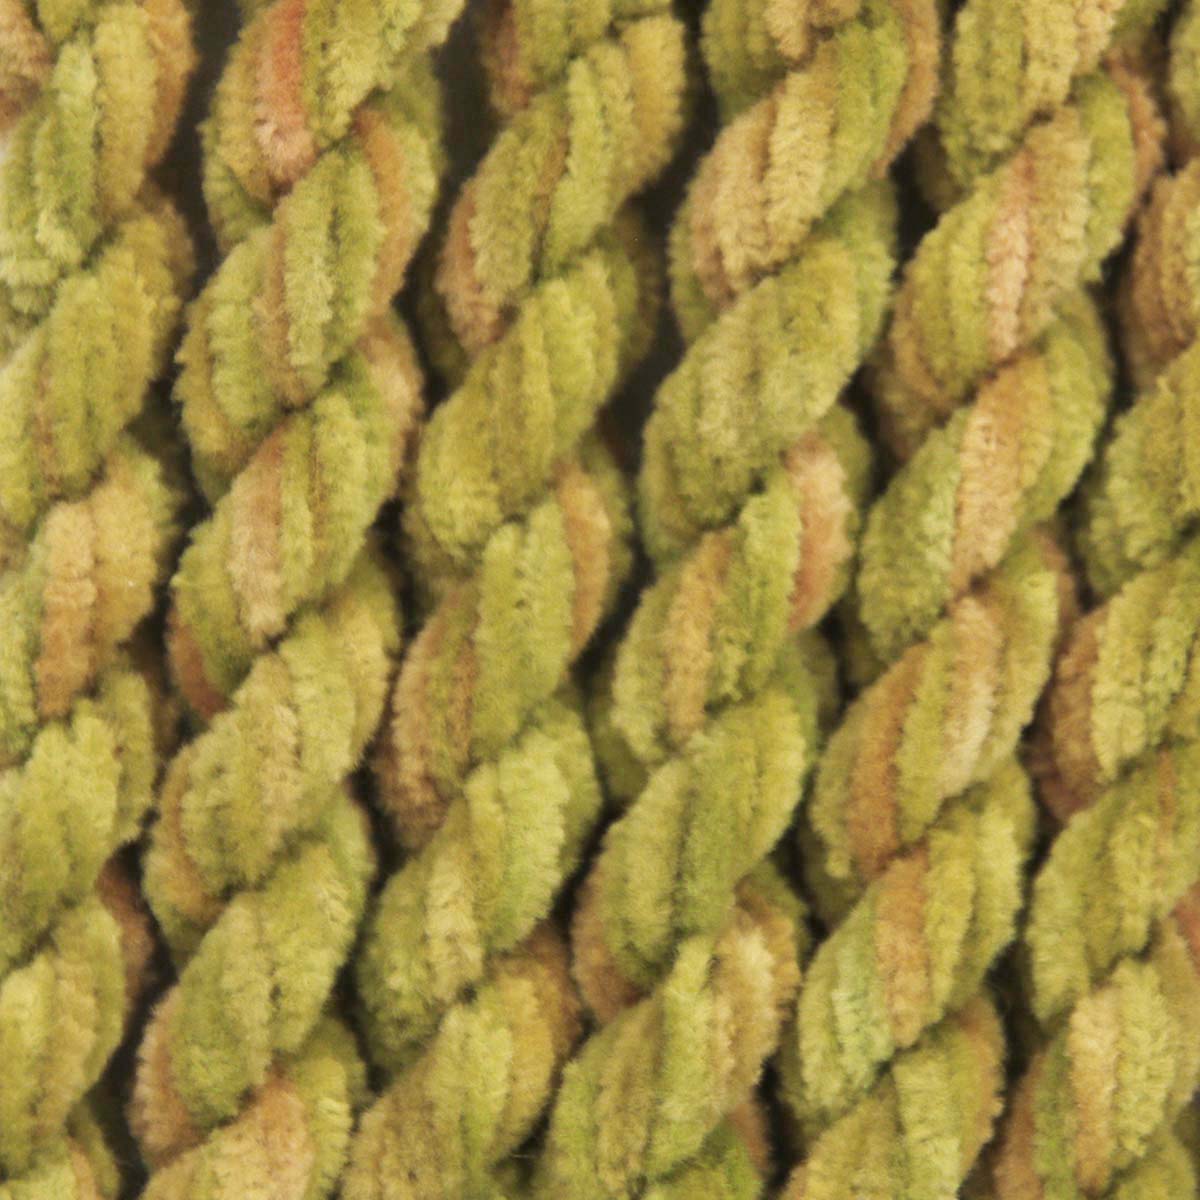 www.colourstreams.com.au Colour Streams Hand Dyed Chenille Threads Slow Stitch Embroidery Textile Arts Fibre DL 26 Tuscan Olive Golds Yellows